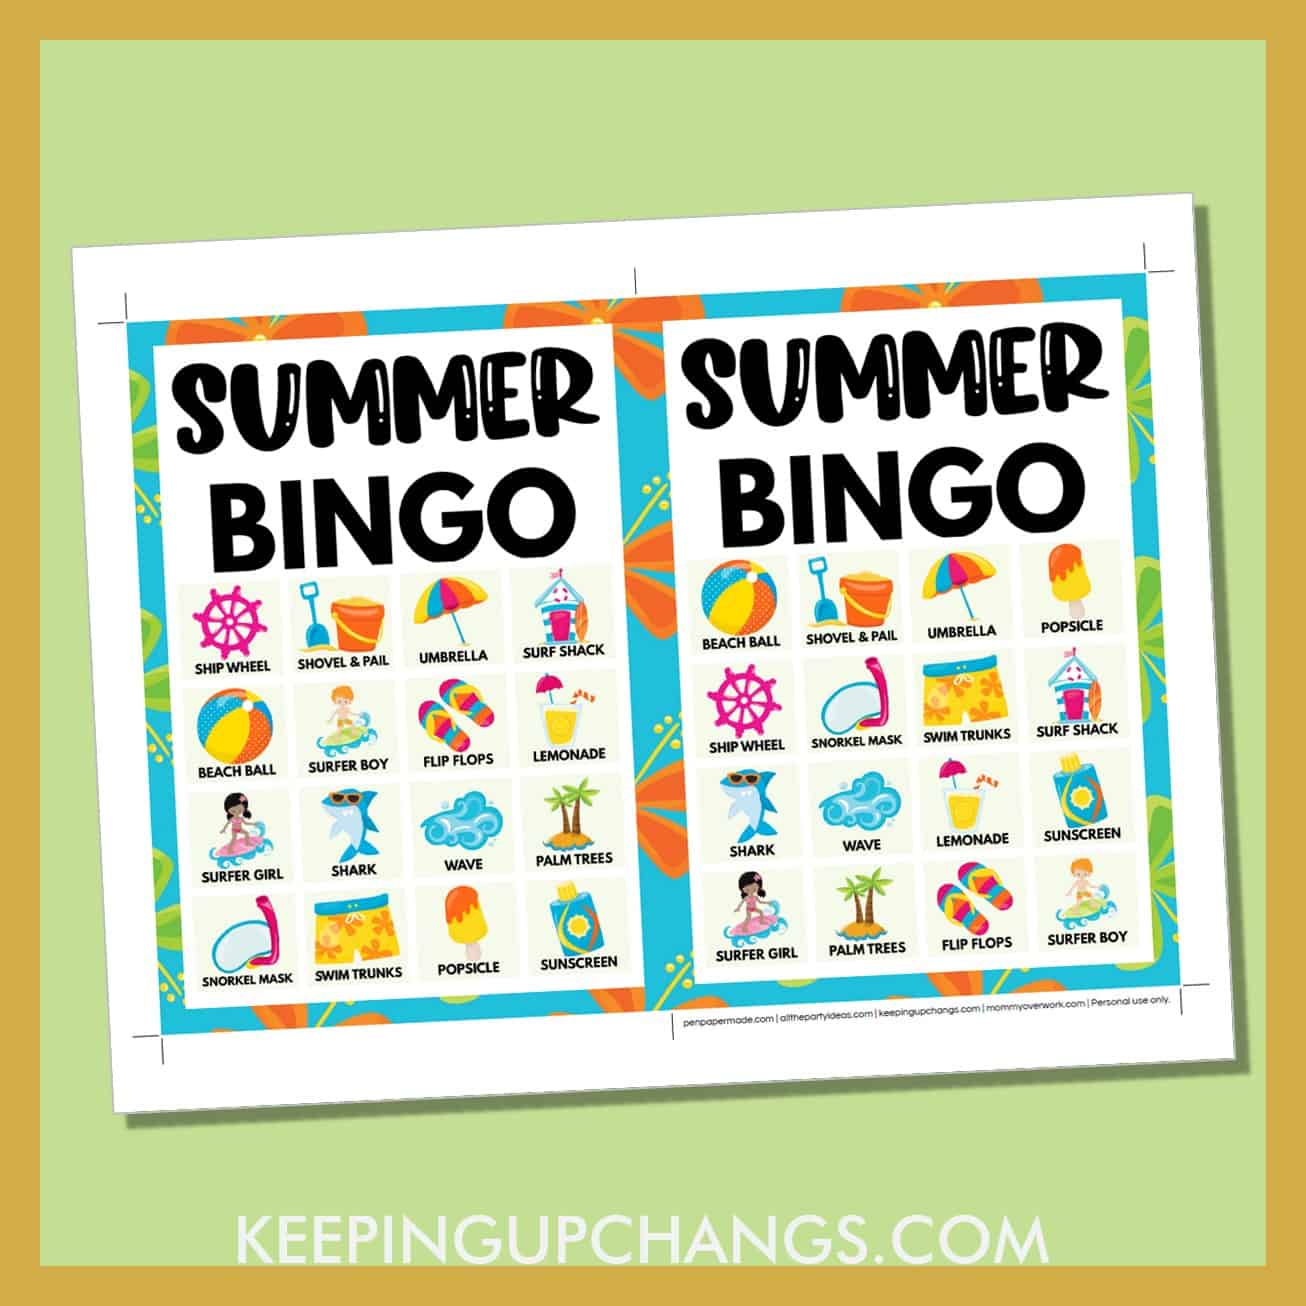 free summer beach bingo card 4x4 5x7 game boards with images and text words.